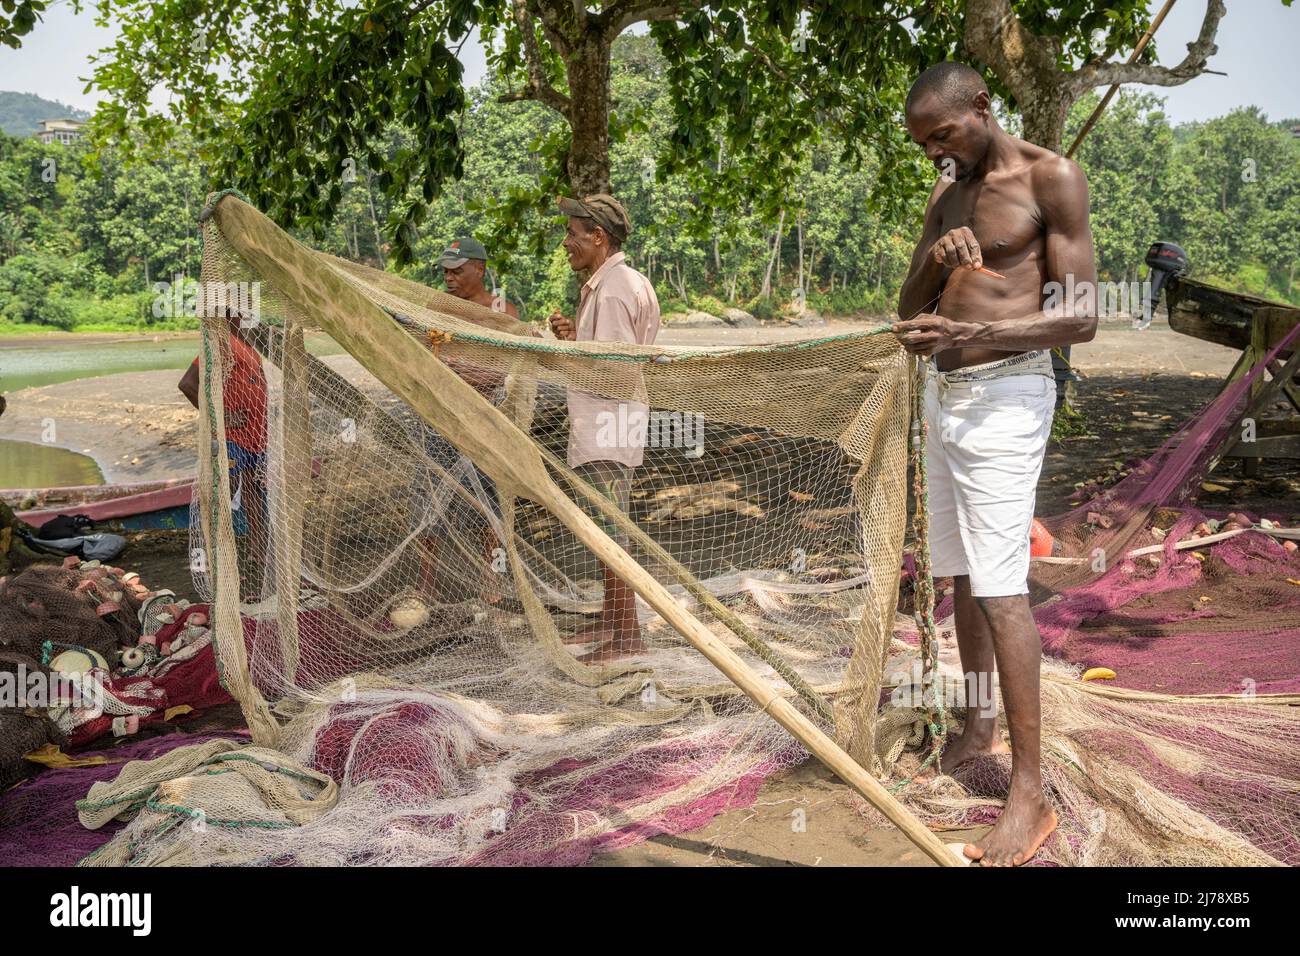 Fishermen repairing the fishing nets before going out to fish. Stock Photo